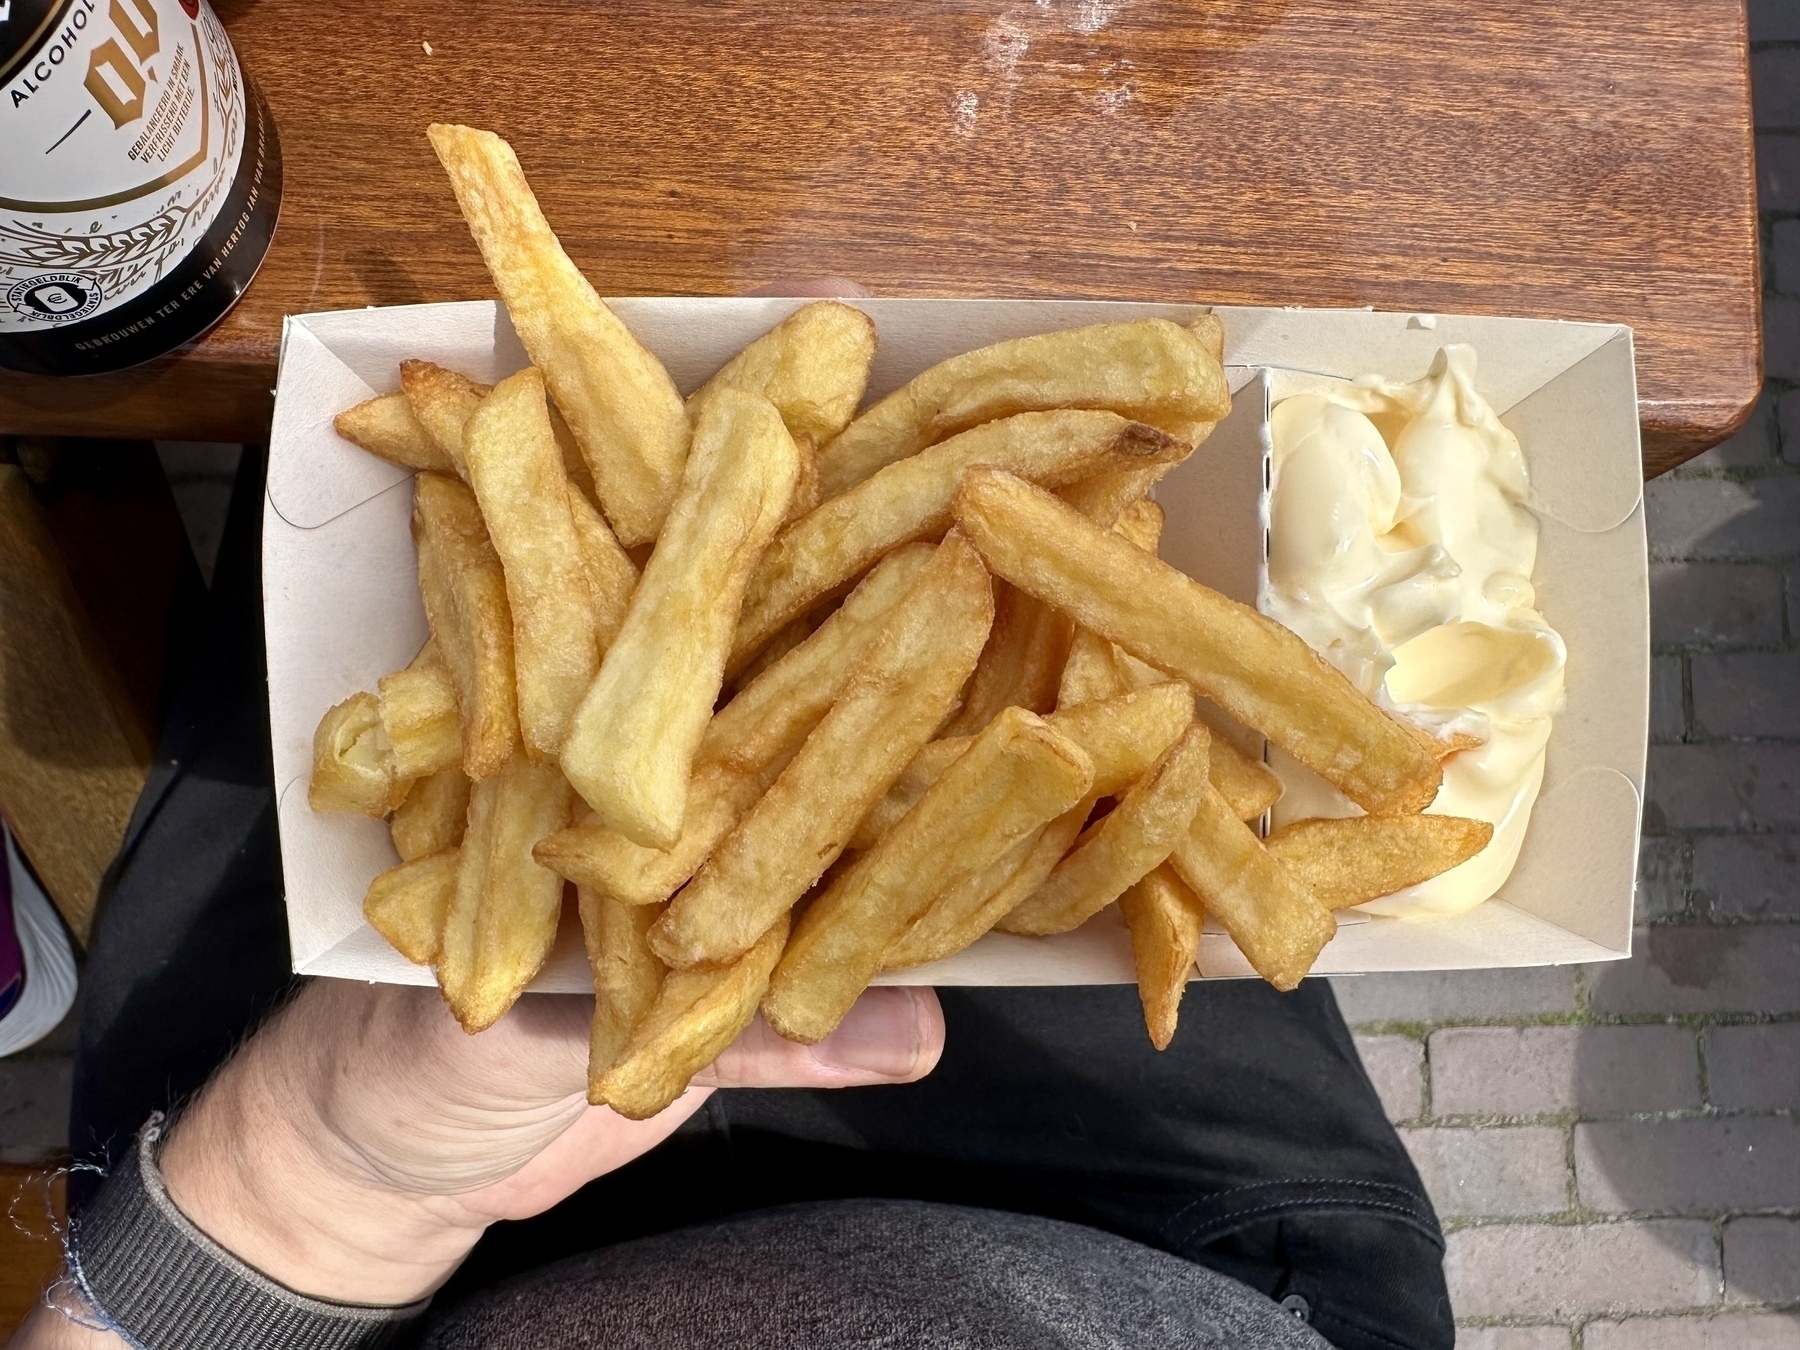 A person is holding a cardboard tray filled with golden fries and a side of mayonnaise.